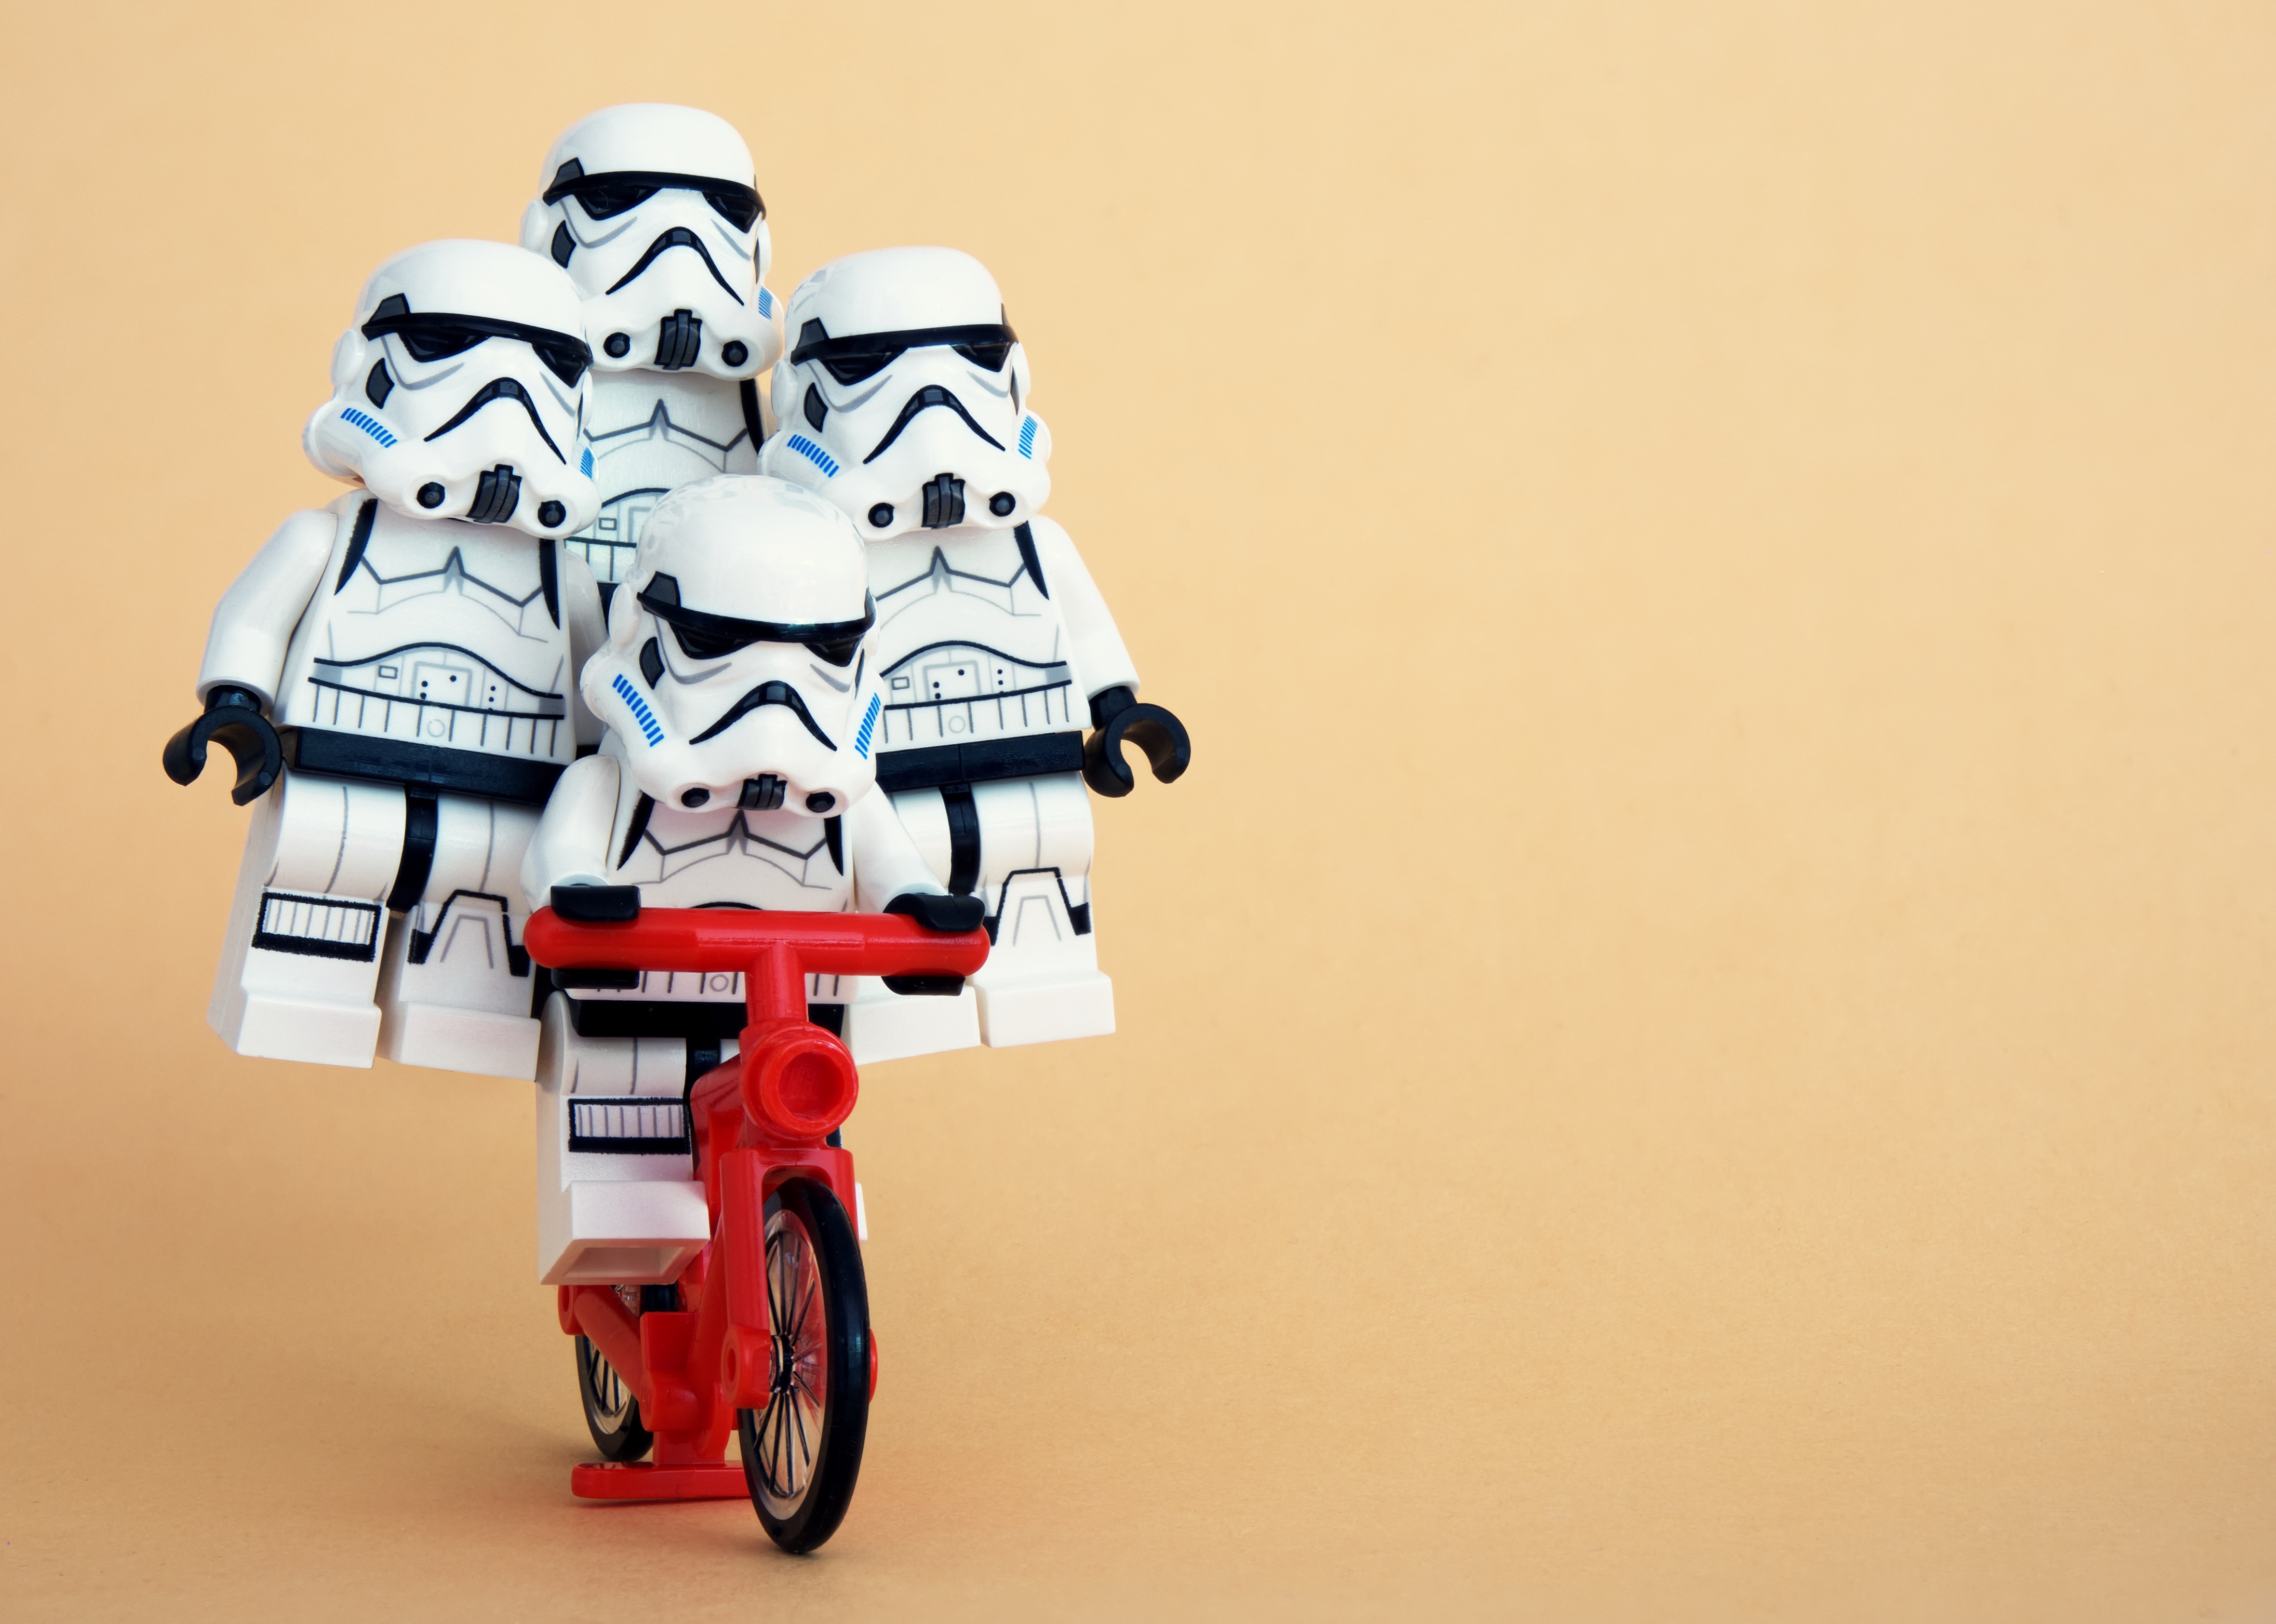 Four Stormtroopers balanced on a Bike